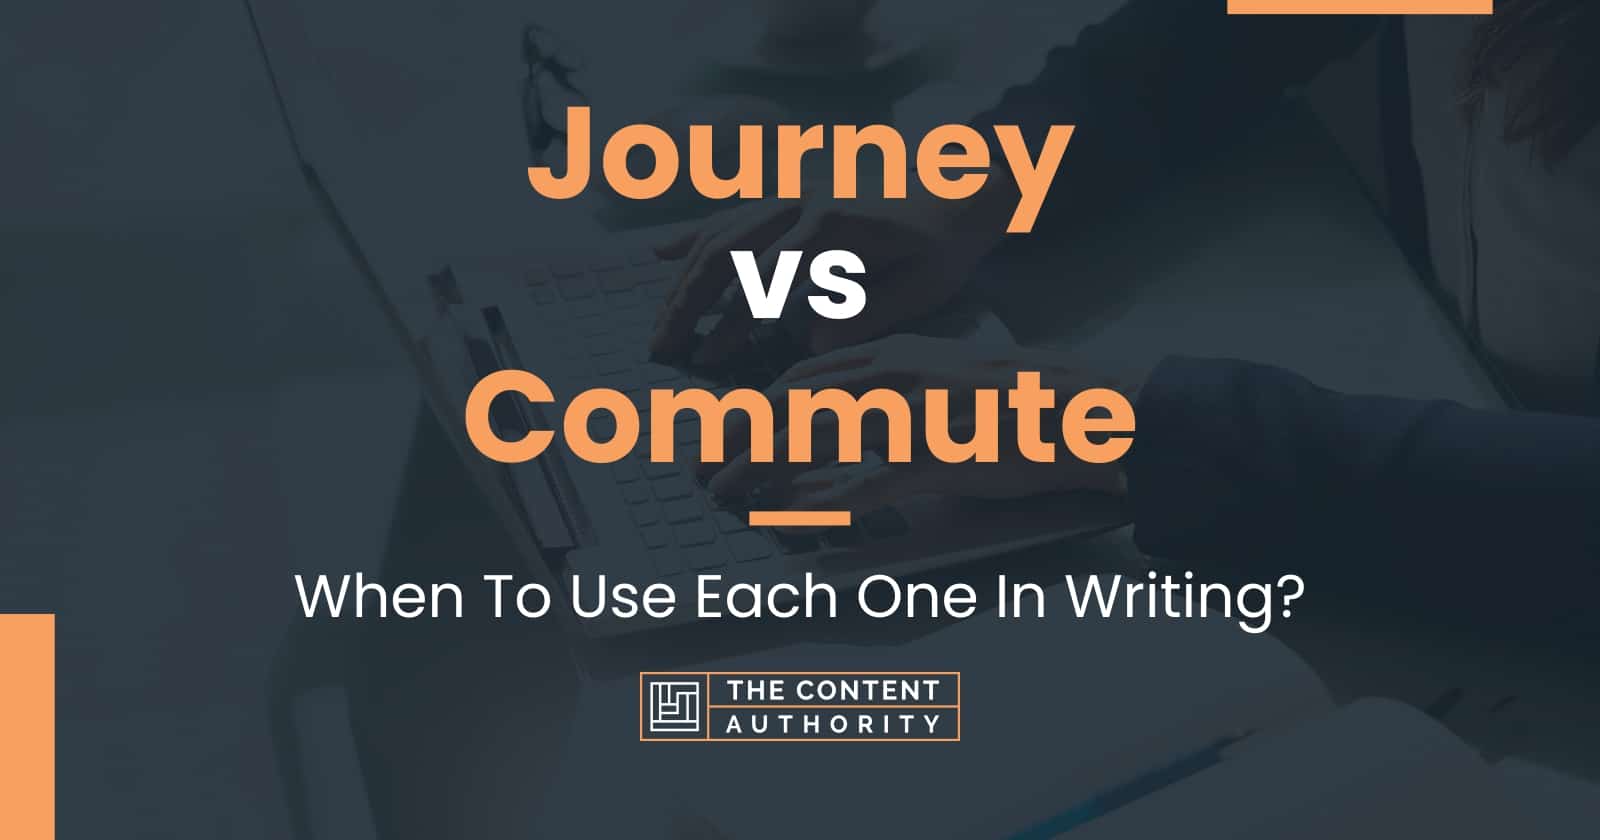 difference between journey and commute